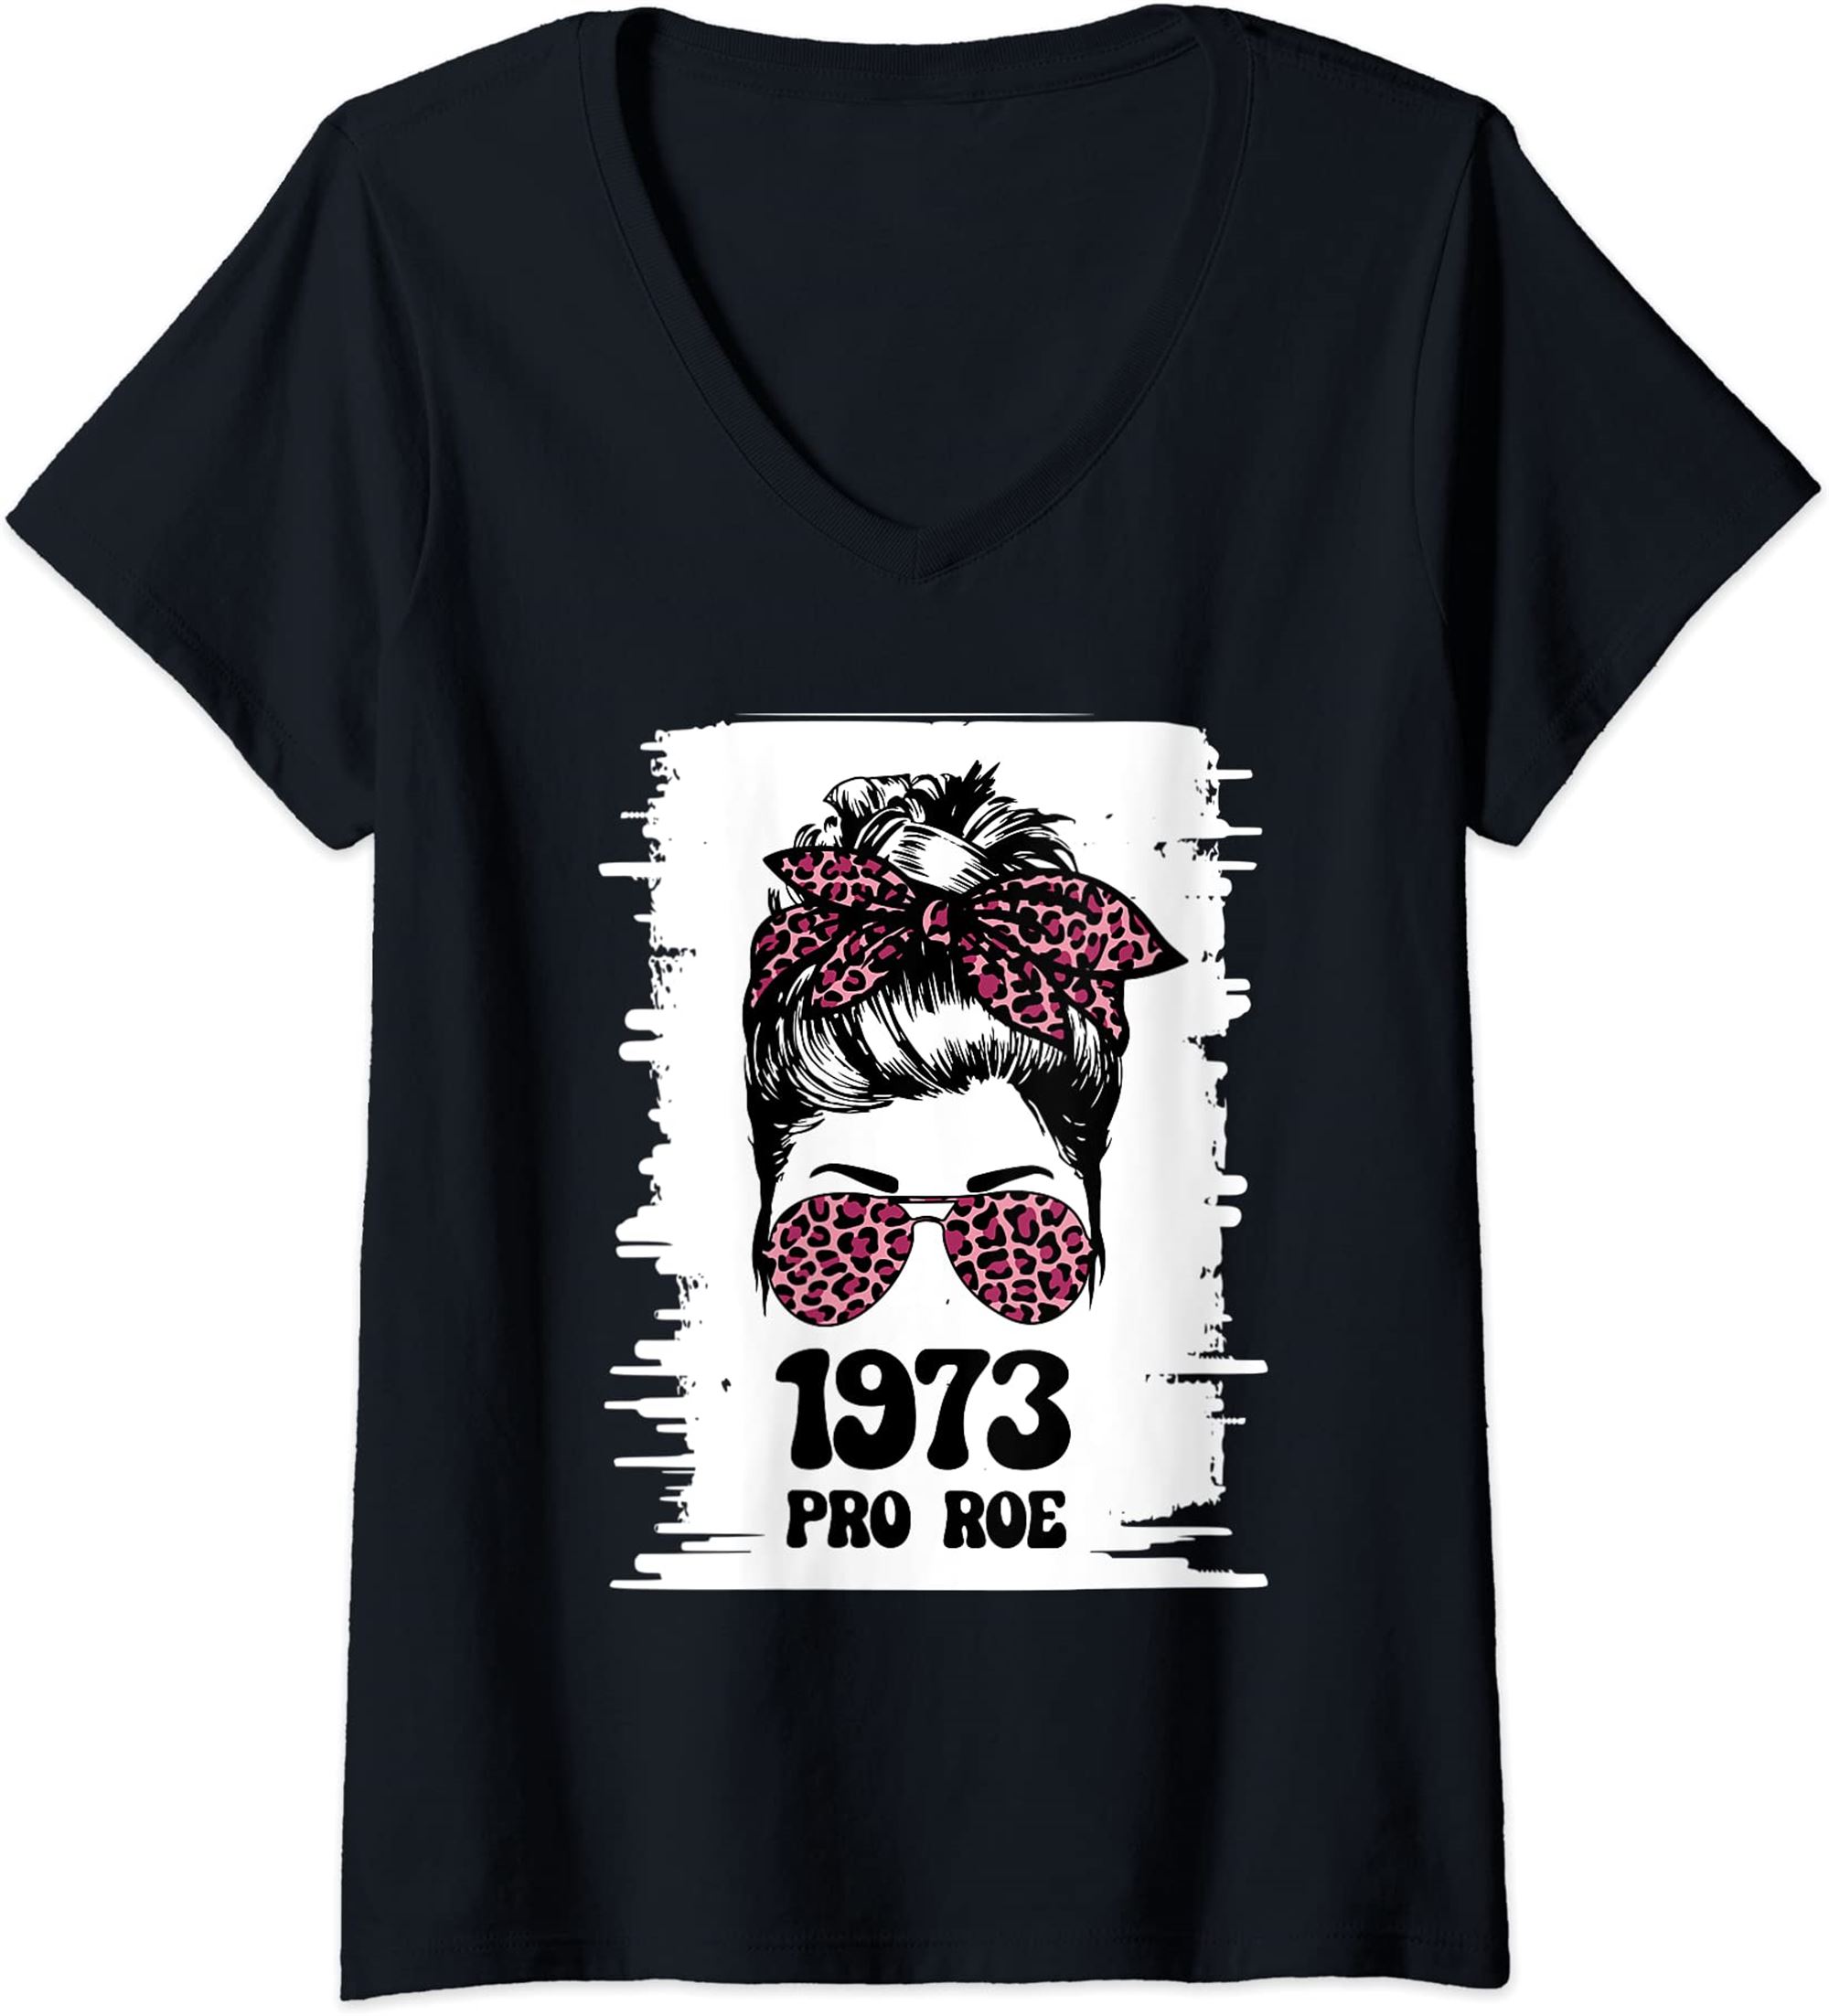 Womens Womens Rights Feminism Protect A Messy Bun 1973 Pro Roe V Neck Tshirt Size Up To 5xl